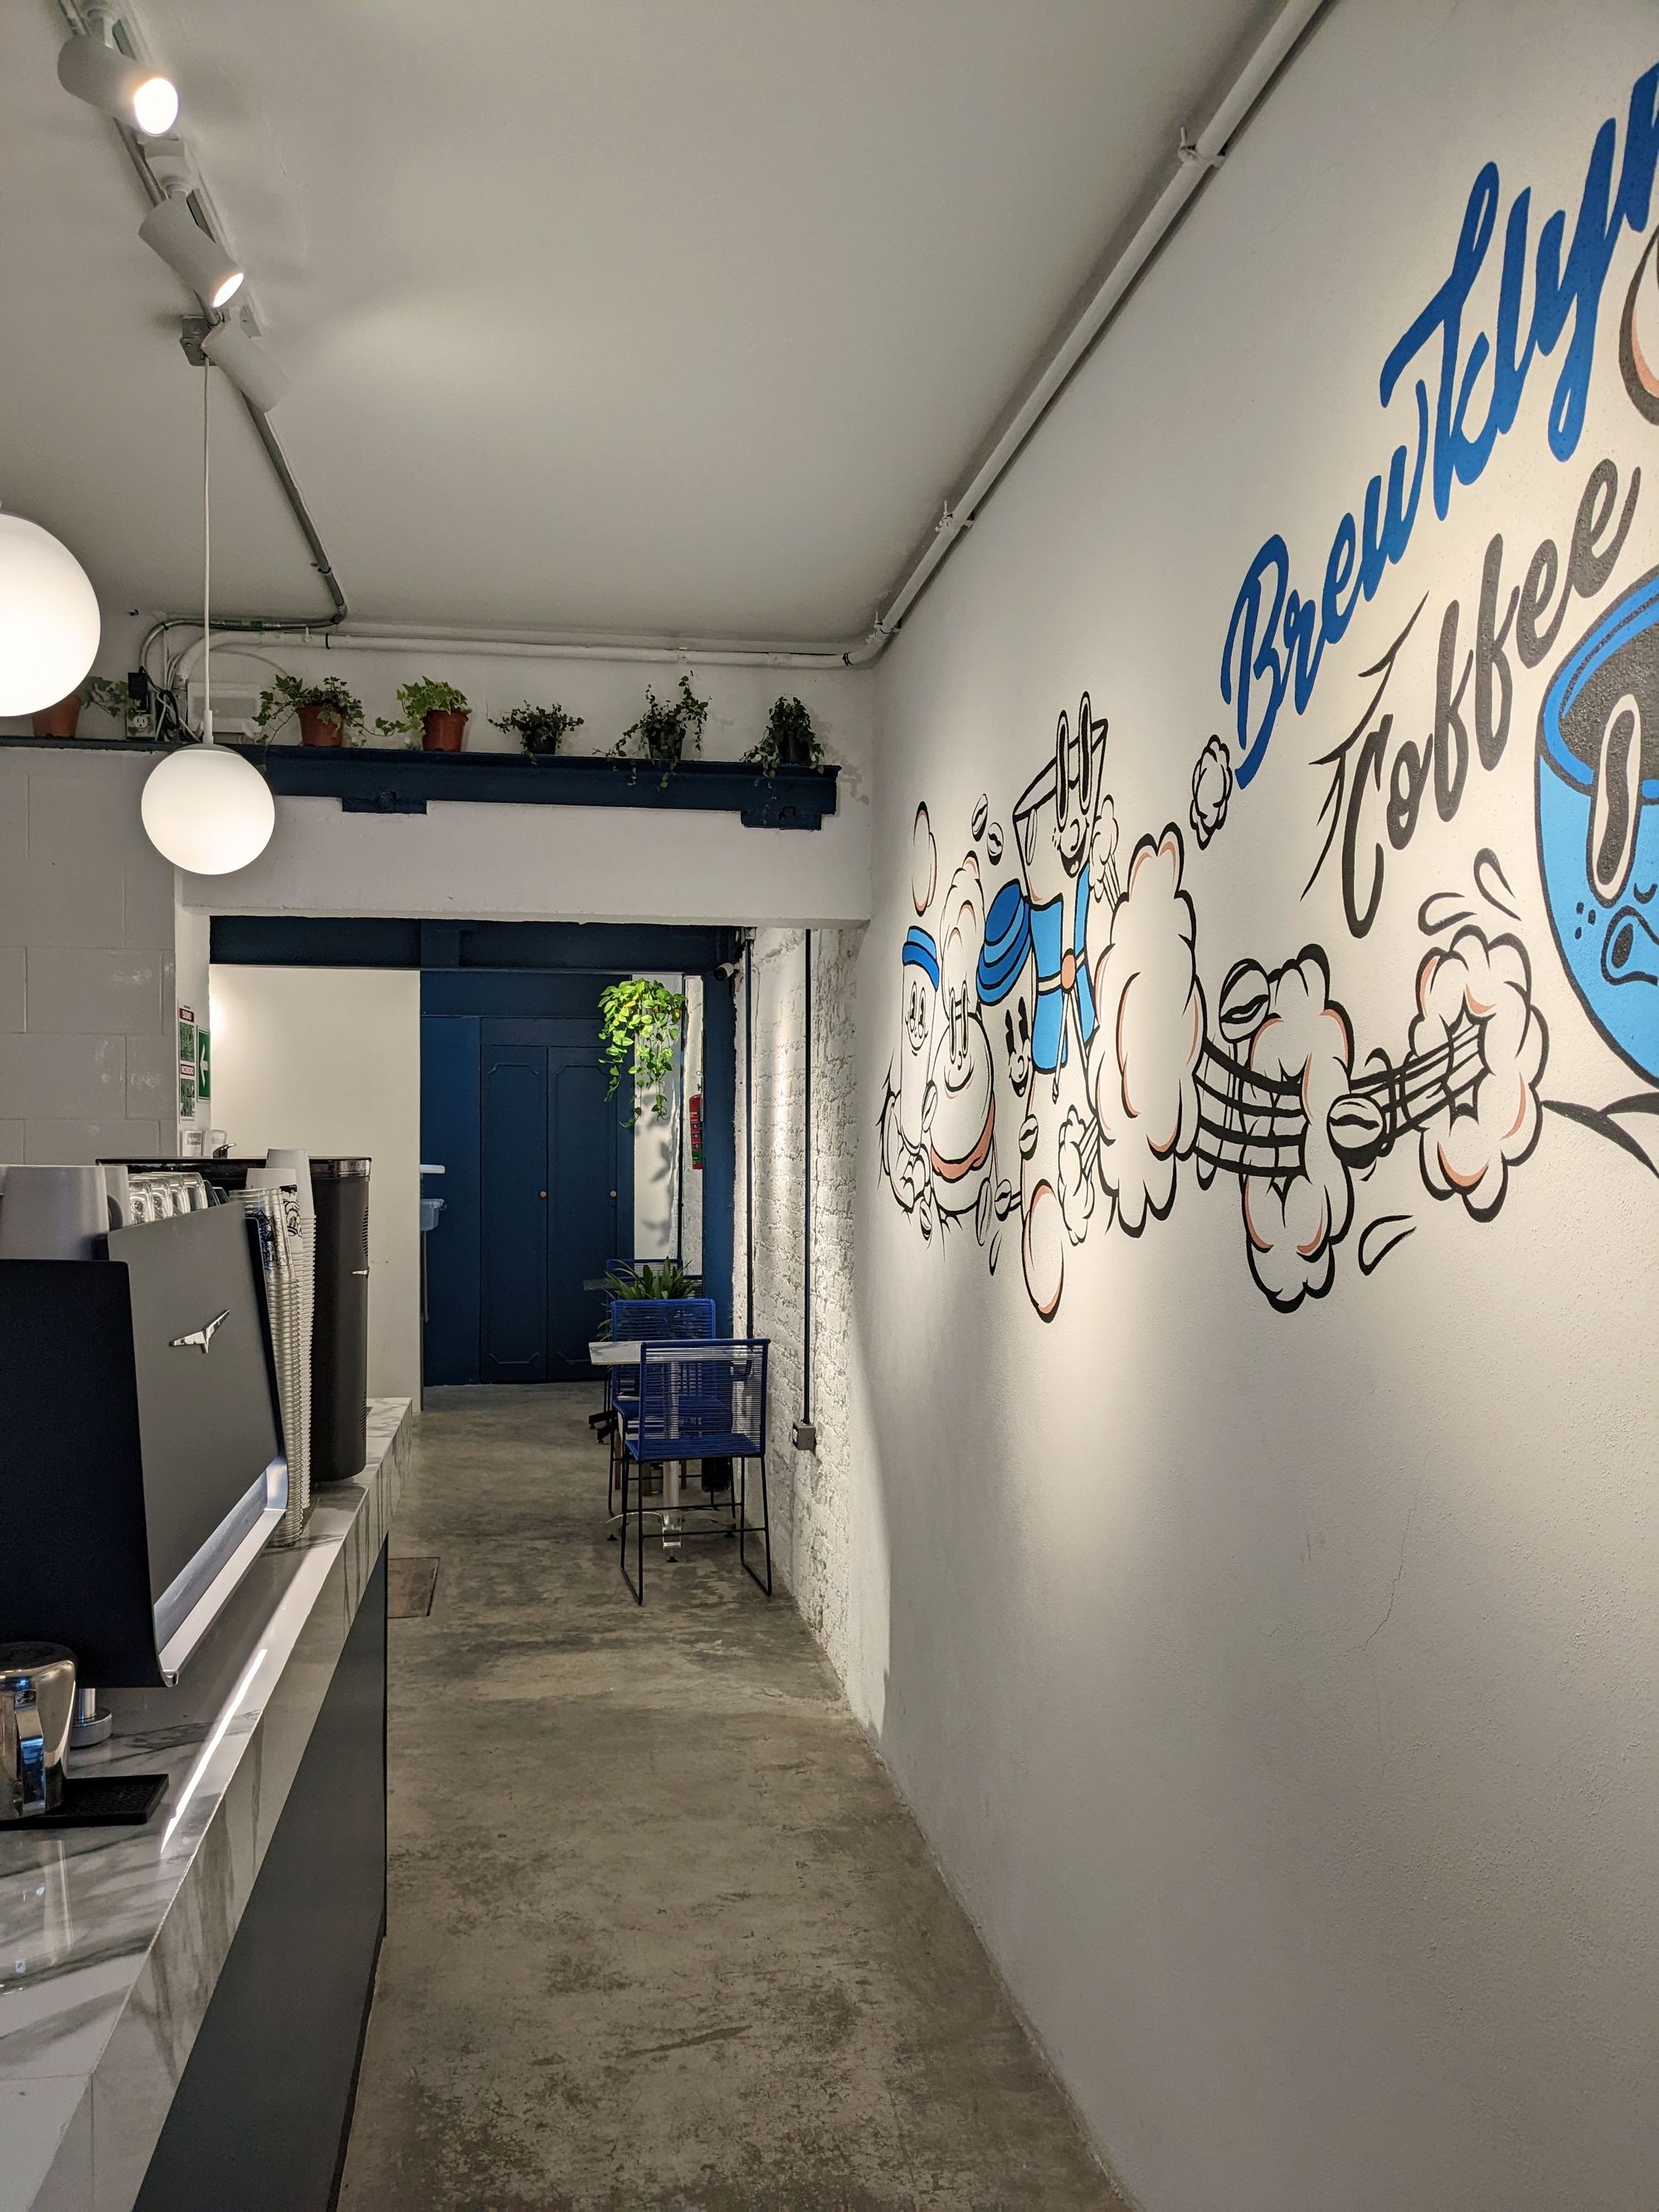 Cafes for remote working in CDMX